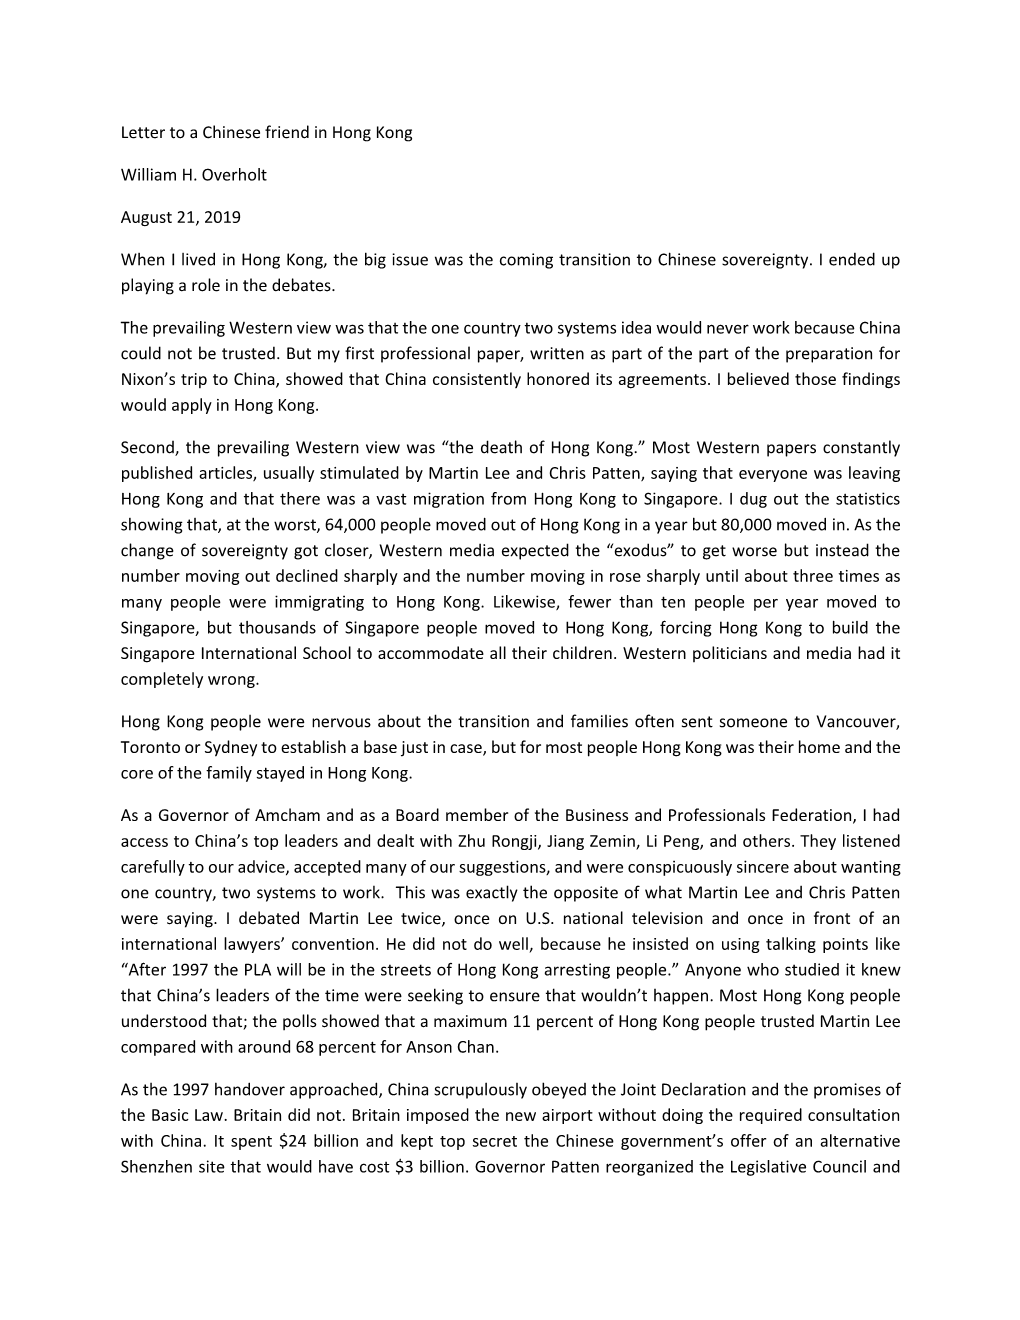 Letter to a Chinese Friend in Hong Kong